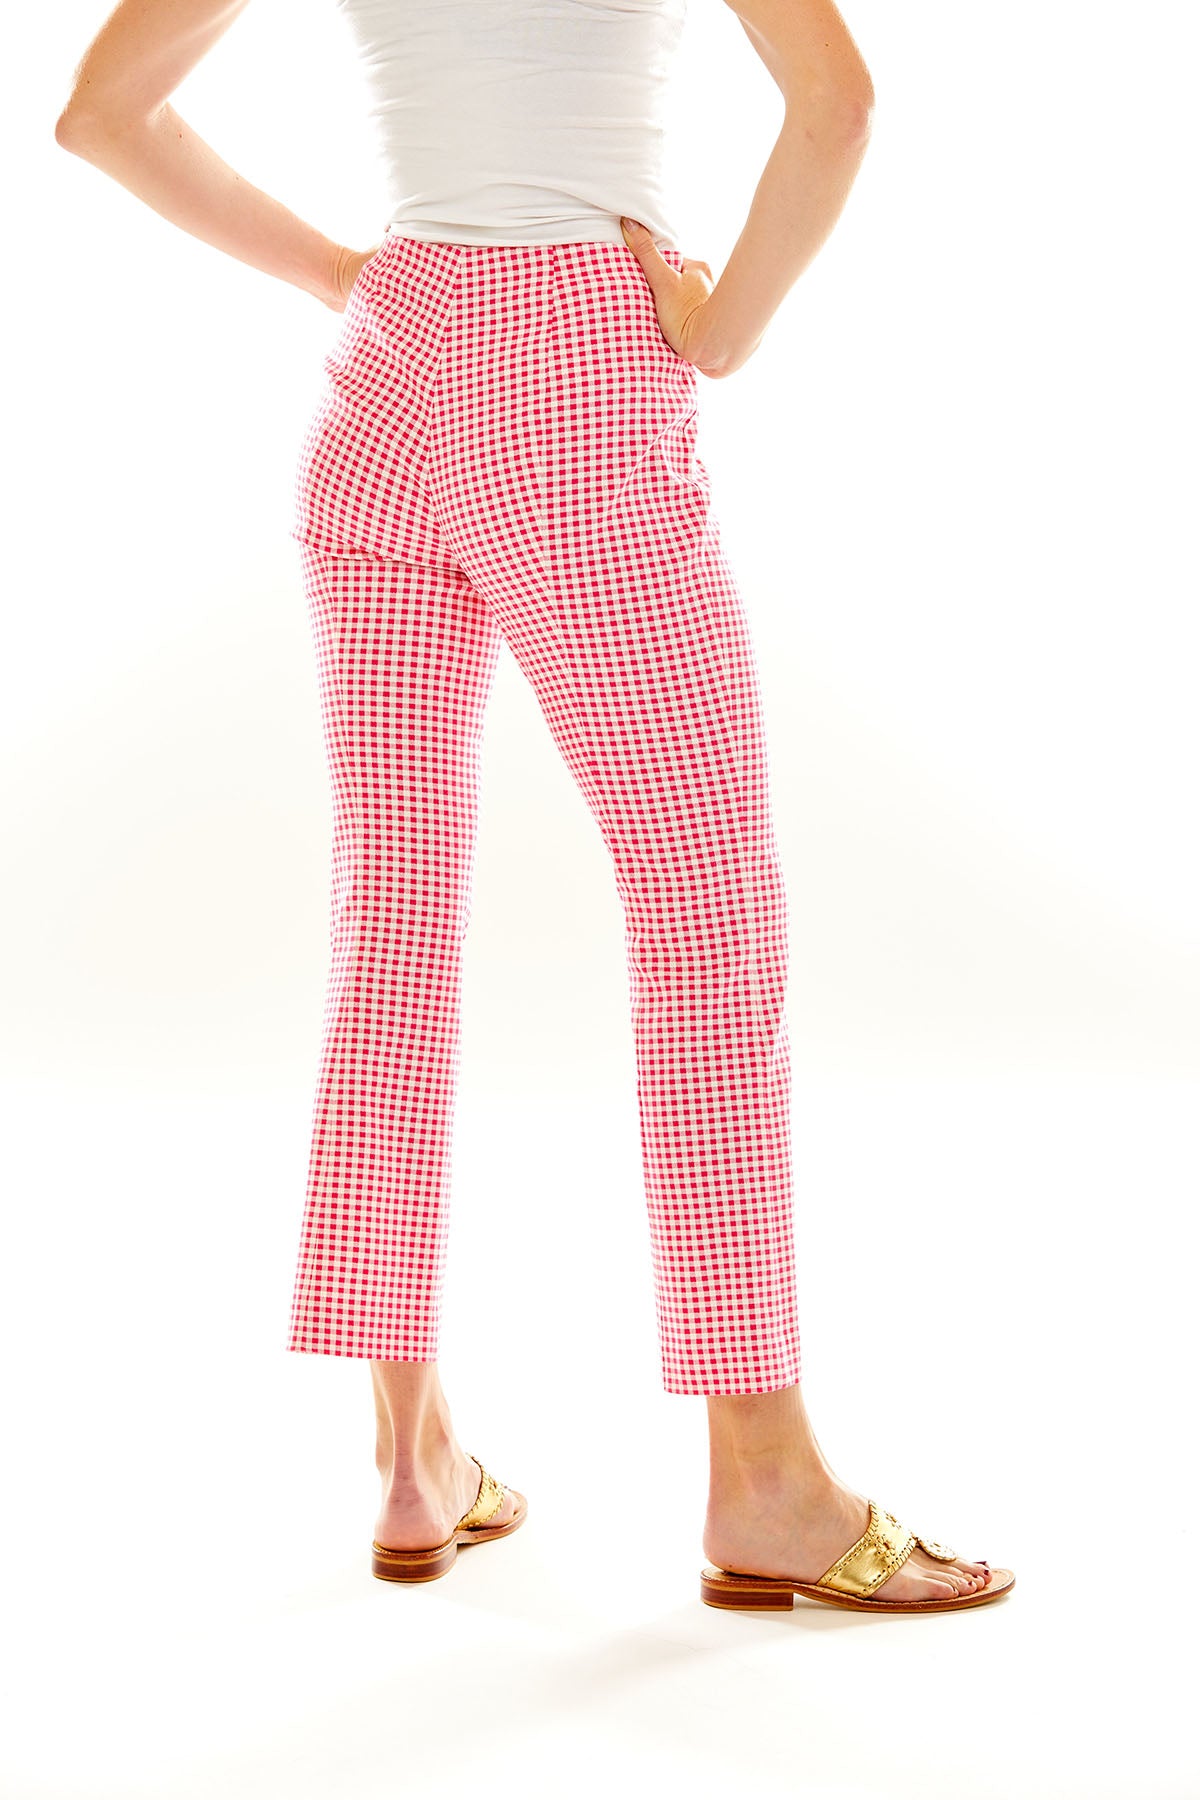 The Mallory Bootcut Pant in Strawberry